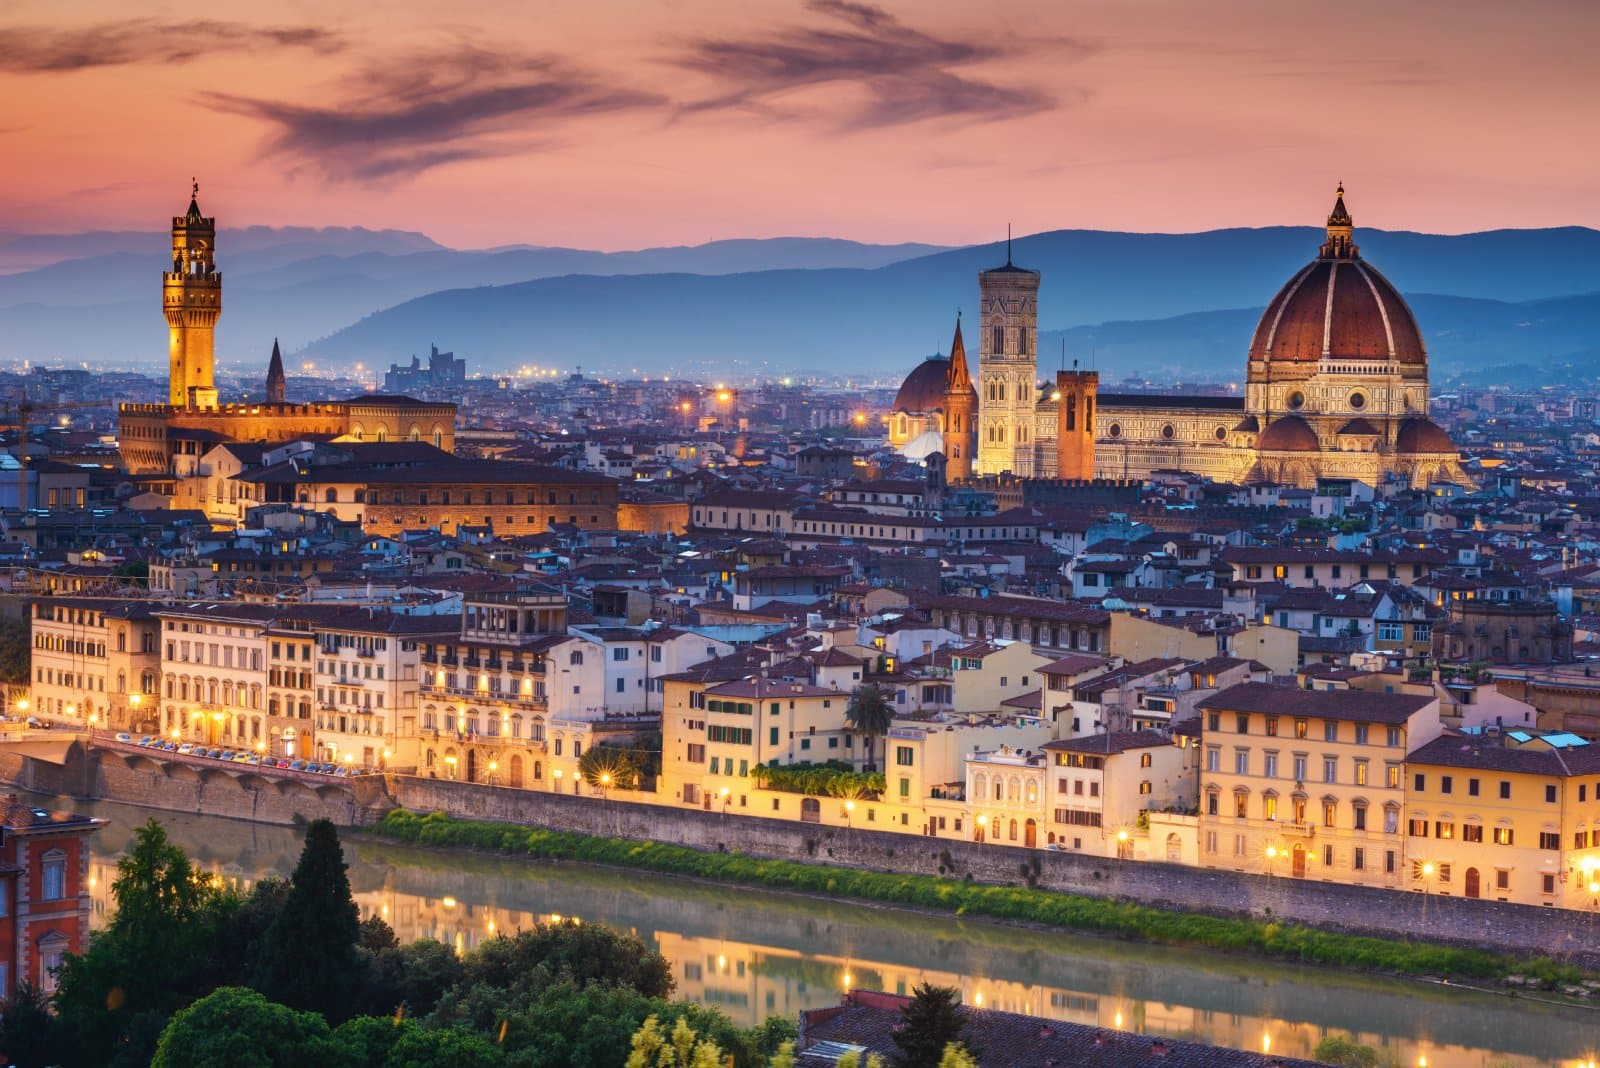 <p class="wp-caption-text">Image Credit: Shutterstock / gillmar</p>  <p><span>Florence, the cradle of the Renaissance, offers art history and fine arts students a once-in-a-lifetime opportunity to study amidst the world’s most renowned artistic treasures. The city’s numerous art schools and institutes provide hands-on learning experiences in painting, sculpture, and fashion. Florence is an ideal setting for Italian language and culture students, offering a deep dive into Italy’s rich historical and culinary heritage. Living and studying in Florence allows students to explore iconic sites like the Uffizi Gallery, the Duomo, and the Ponte Vecchio, turning the city into a living campus.</span></p>